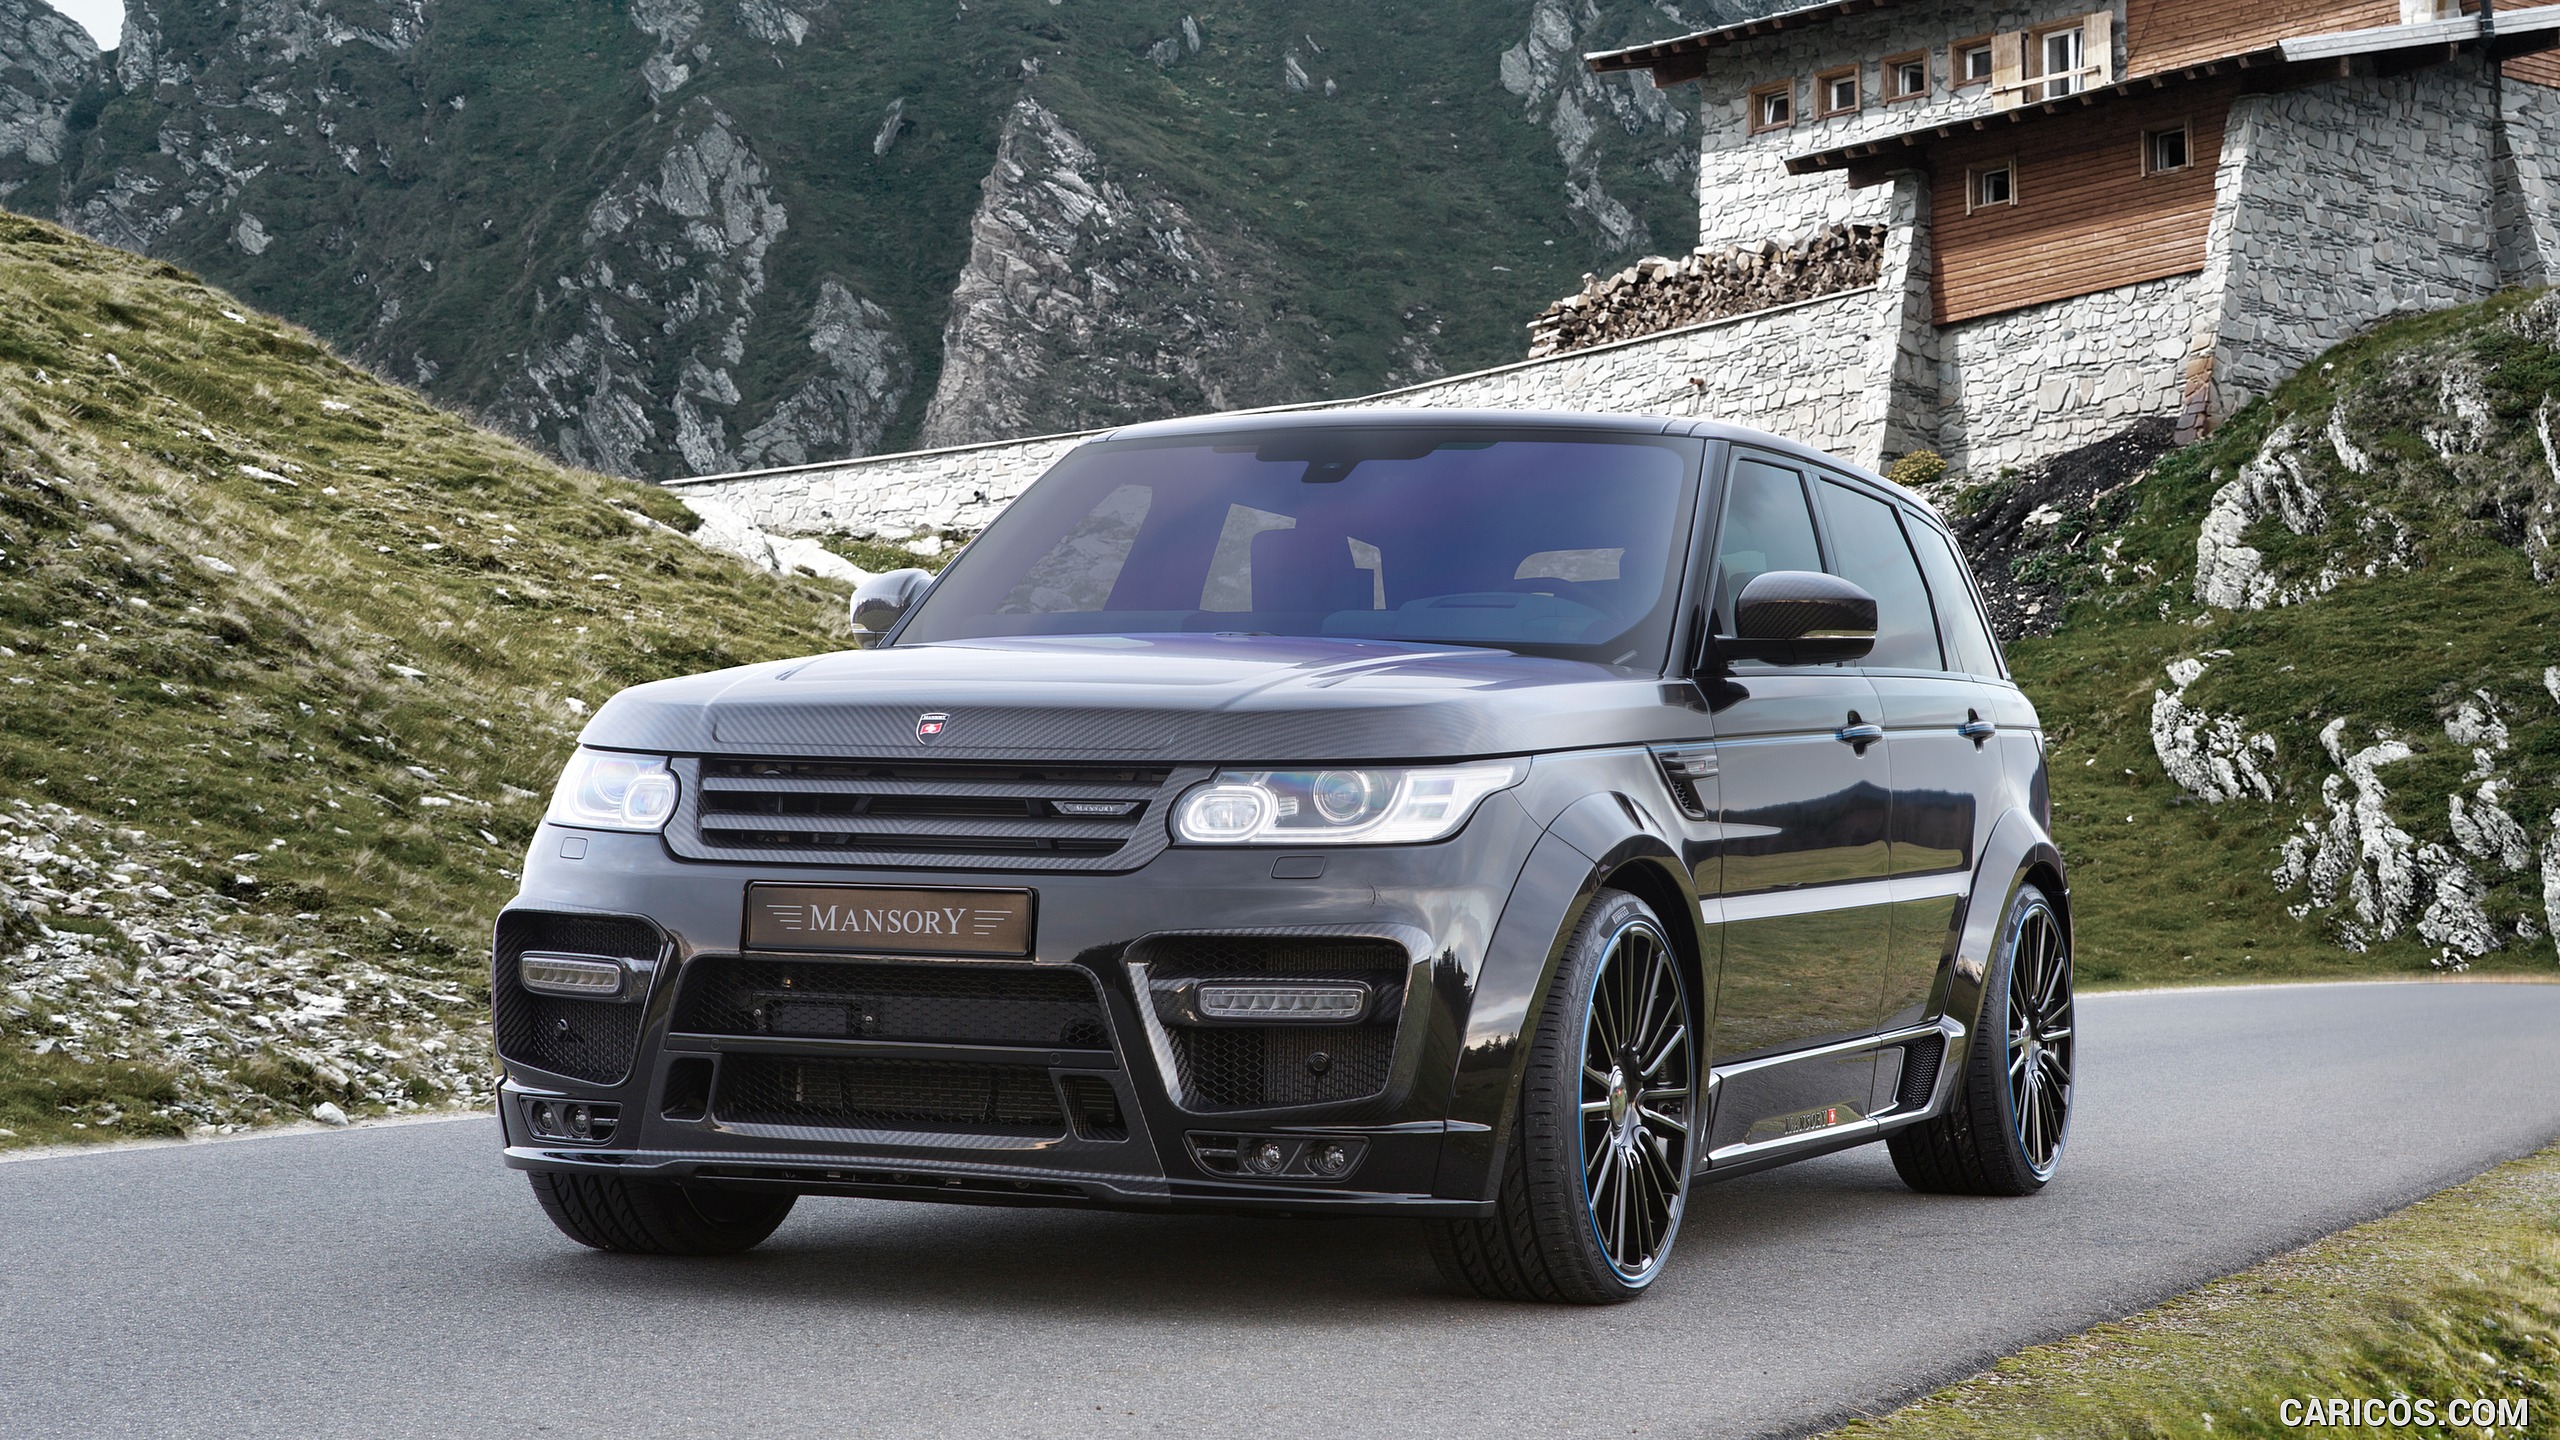 2016 MANSORY Range Rover Sport - Front, #1 of 7